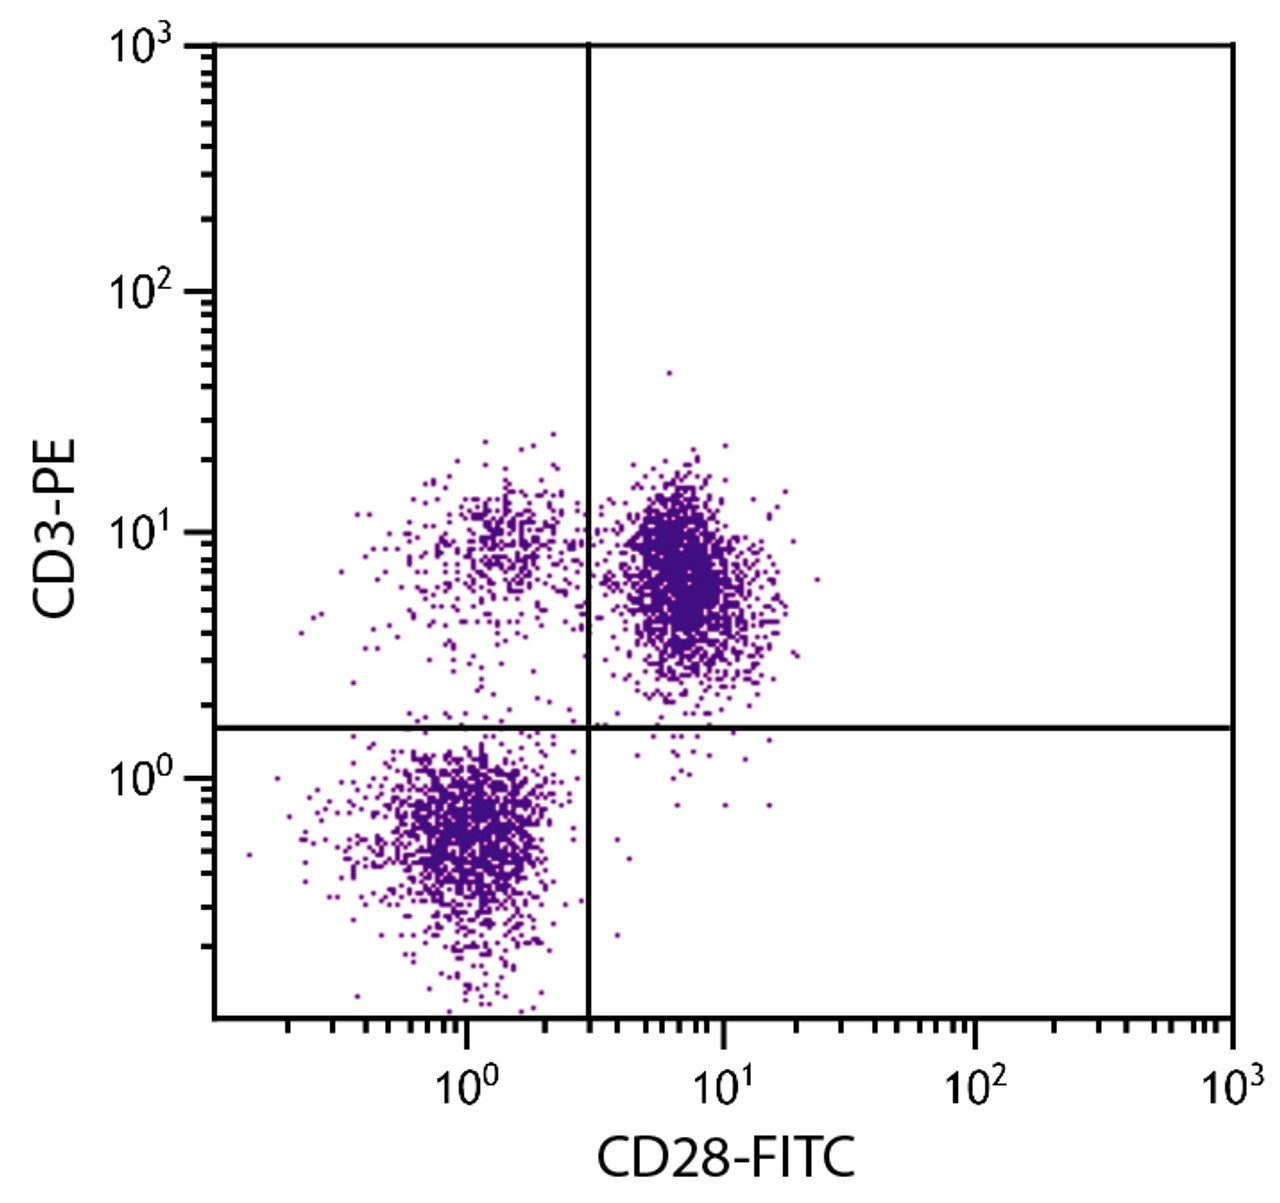 Chicken peripheral blood mononuclear cells were stained with Mouse Anti-Chicken CD28-FITC (Cat. No. 99-237) and Mouse Anti-Chicken CD3-PE .